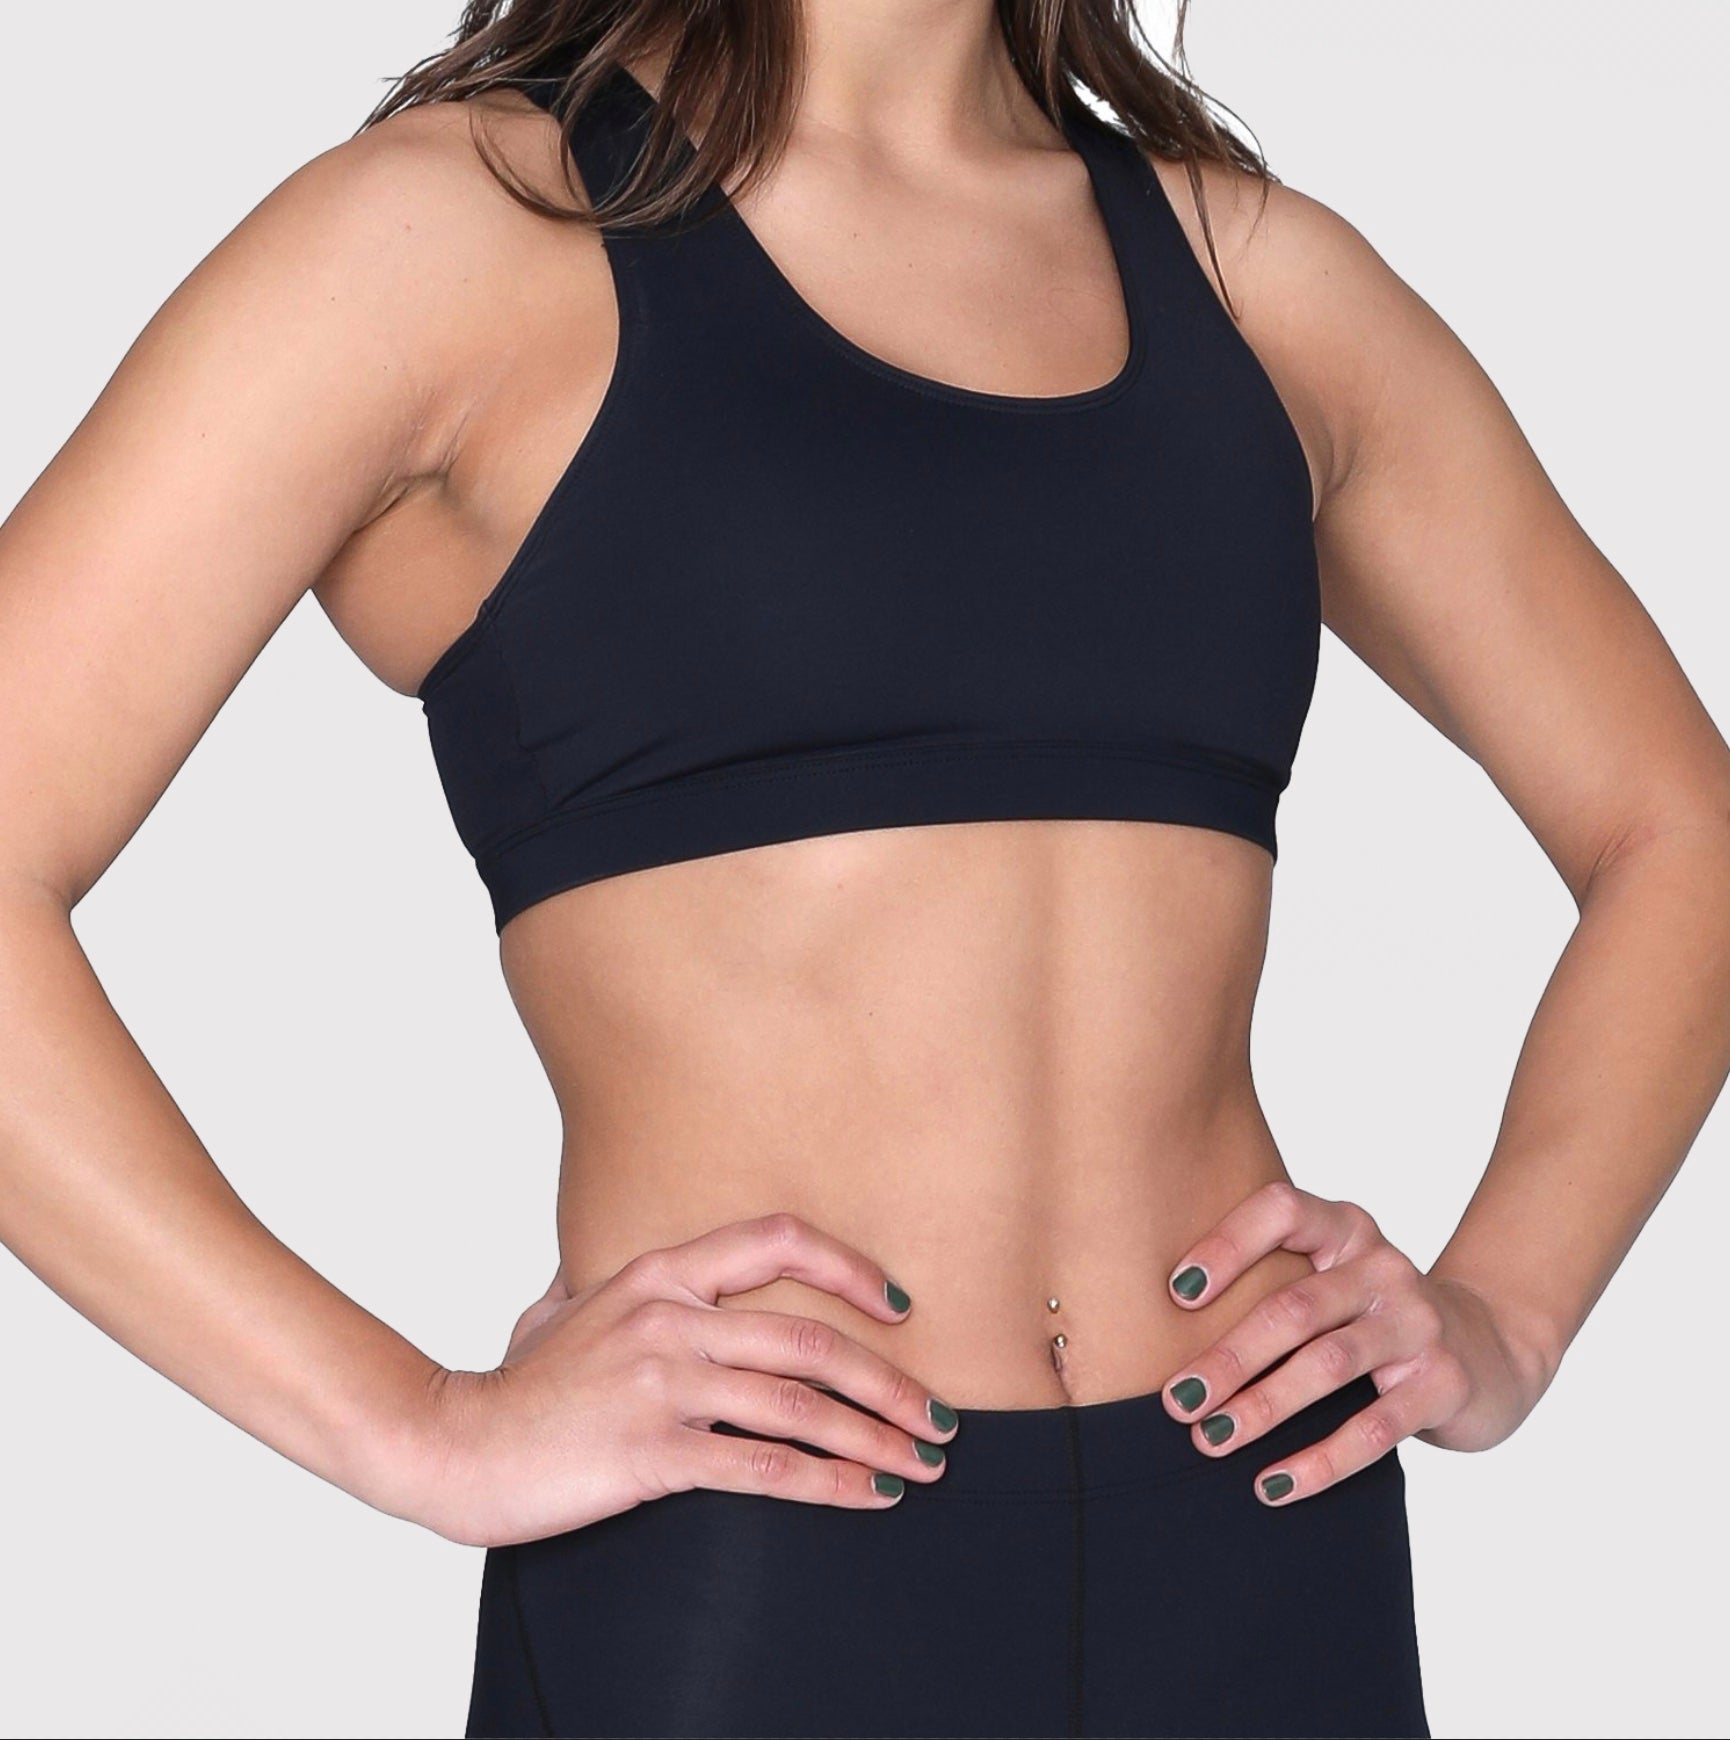 Benefits of Compression Garments and Sports Bras in Exercise for